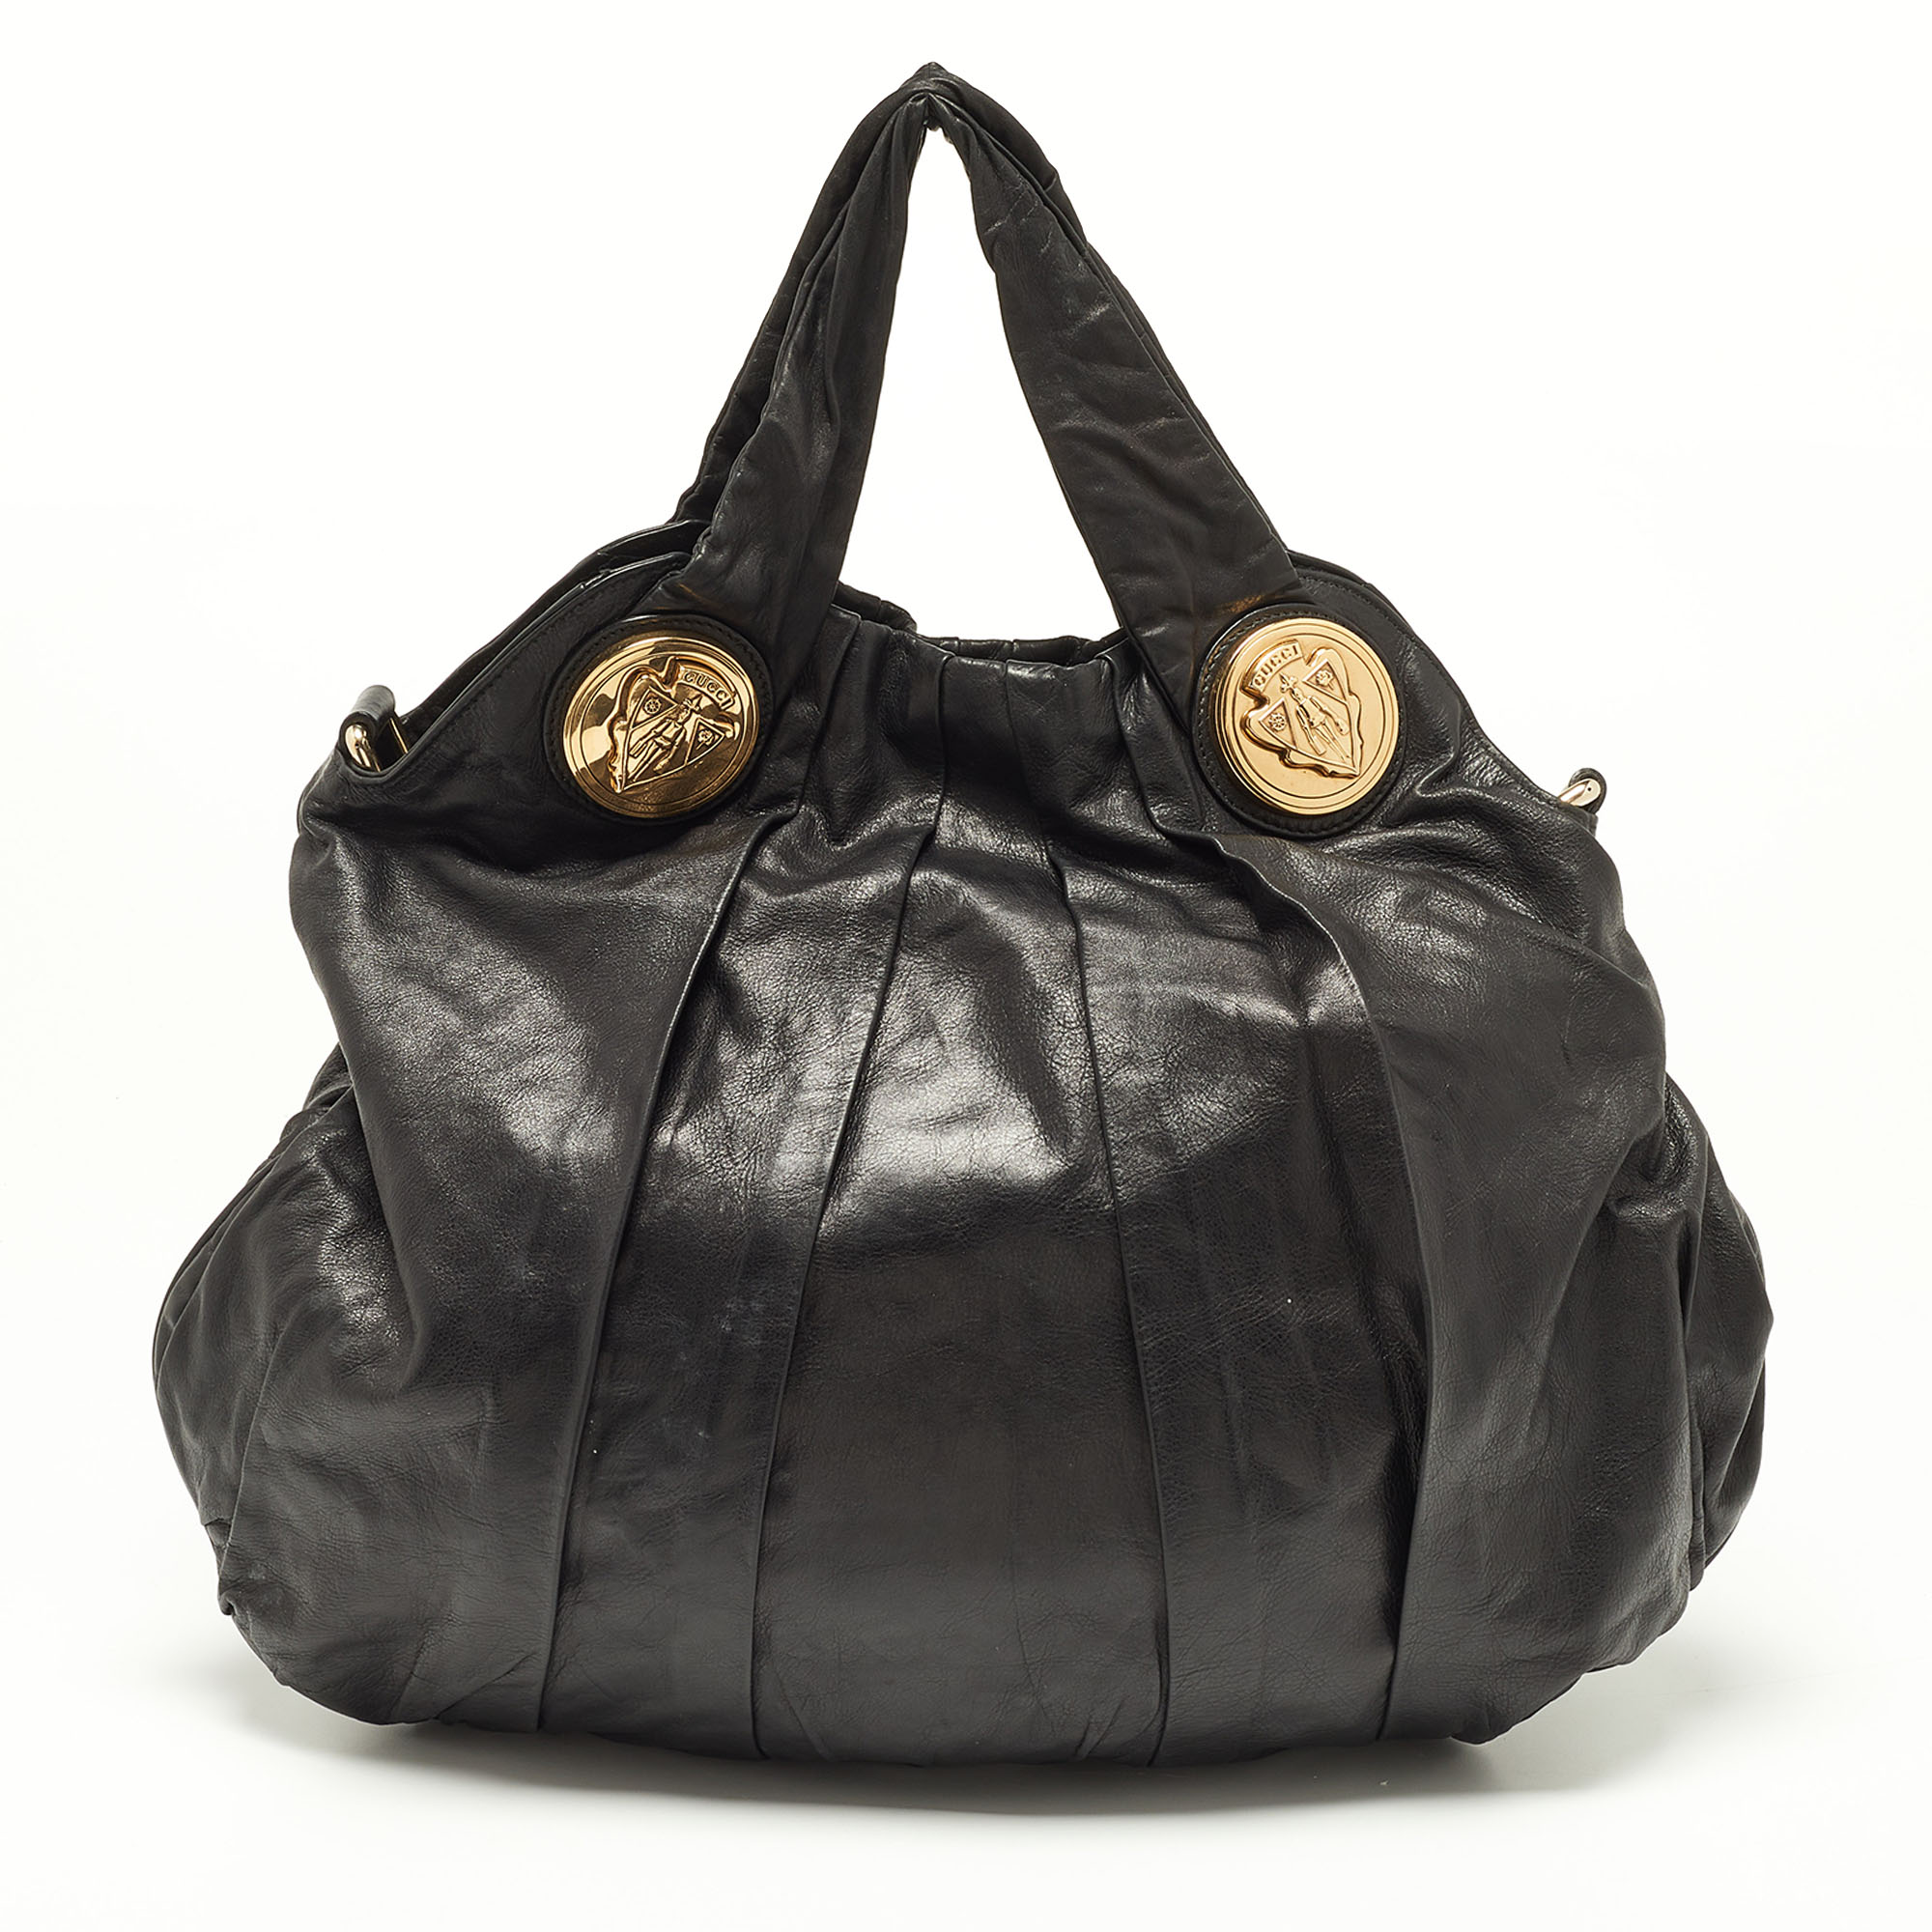 Gucci Black Leather Large Hysteria Hobo